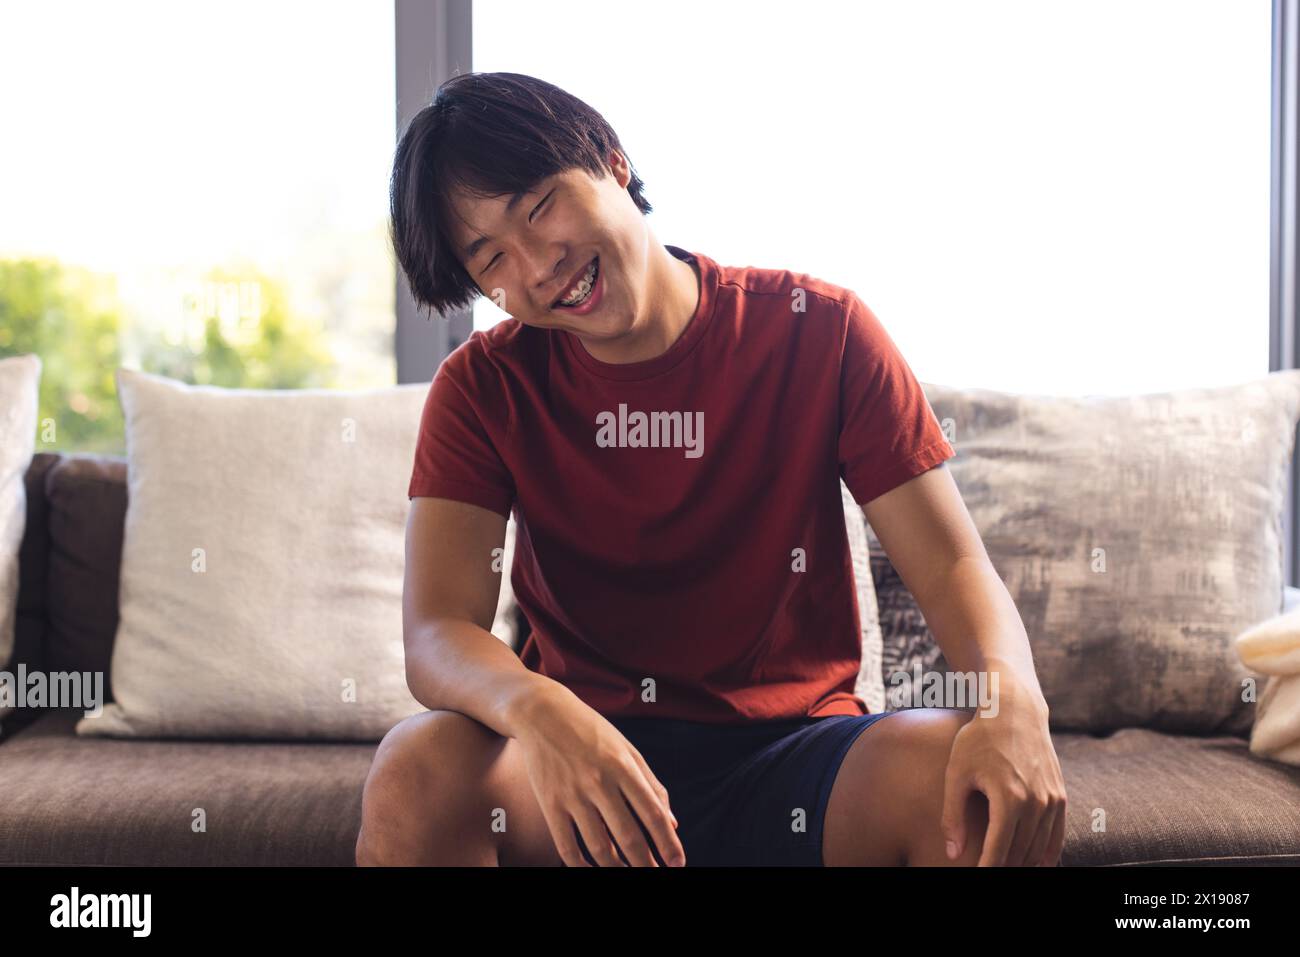 Asian teenage boy sitting on a couch at home, laughing during a video call Stock Photo